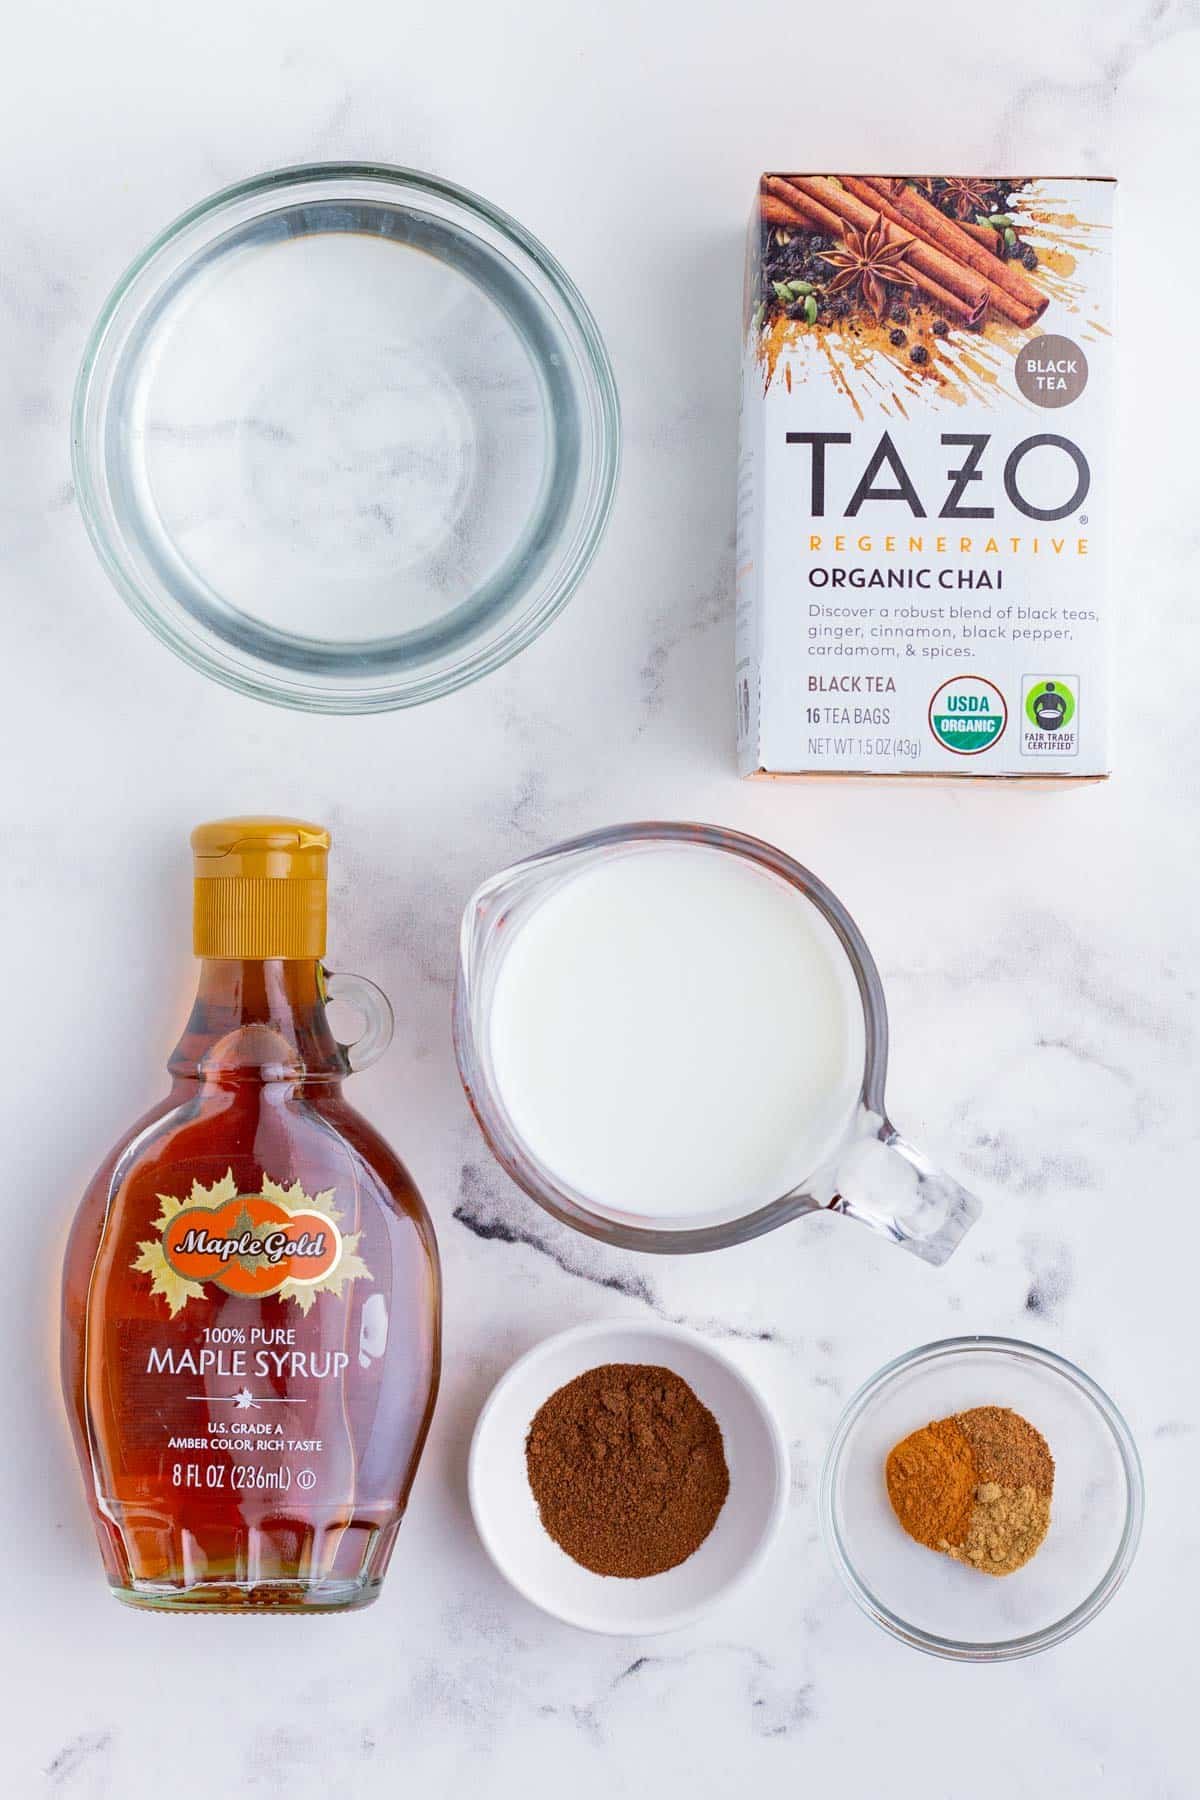 Chai tea, spices, milk, sweetener, and water are the ingredients needed for an iced Chai tea latte.